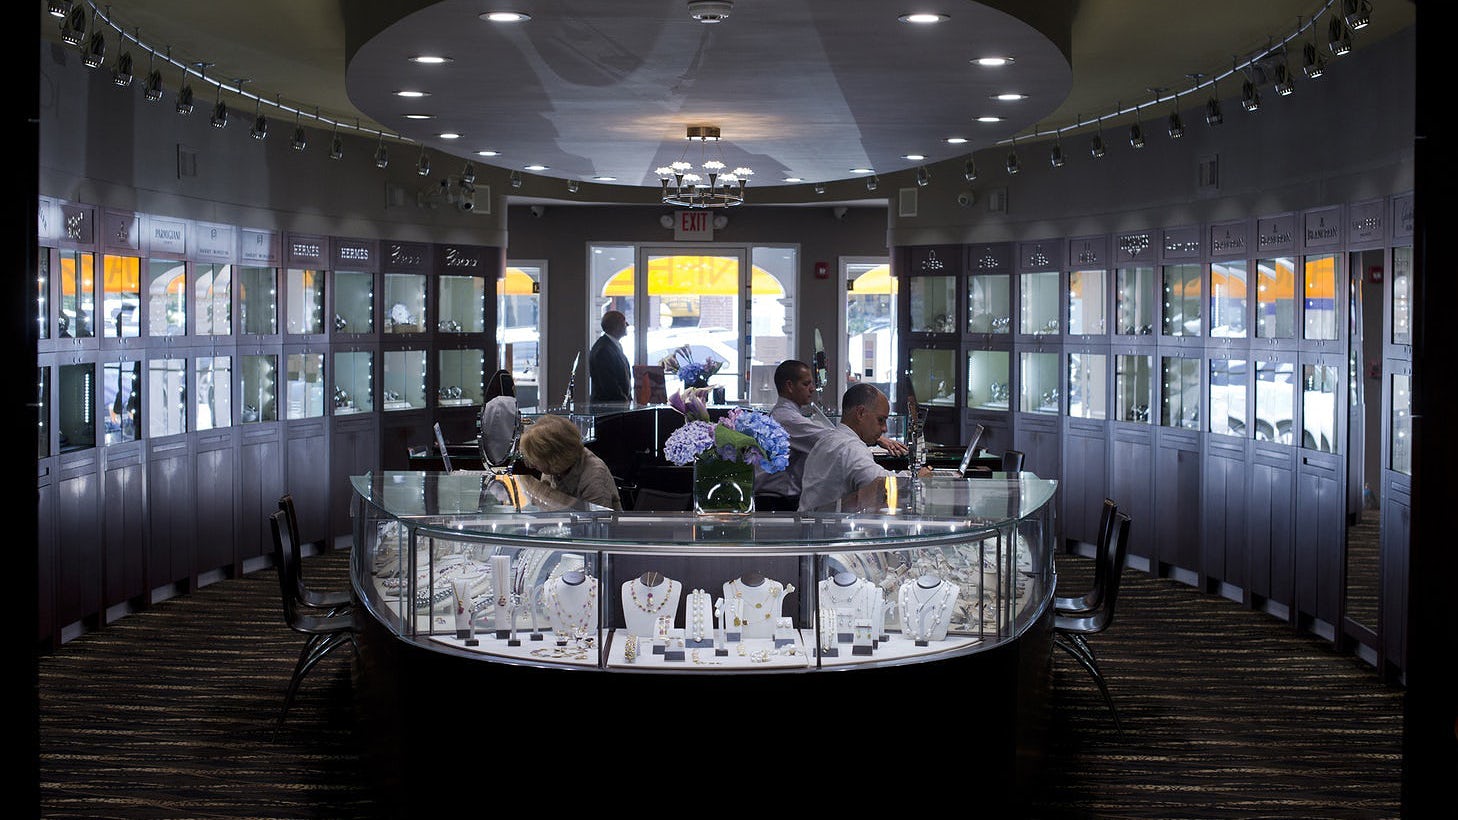 Manfredi Jewels Is Throwing A 30th Anniversary Party (And You're Invited) The watch world institution is celebrating three decades in business.